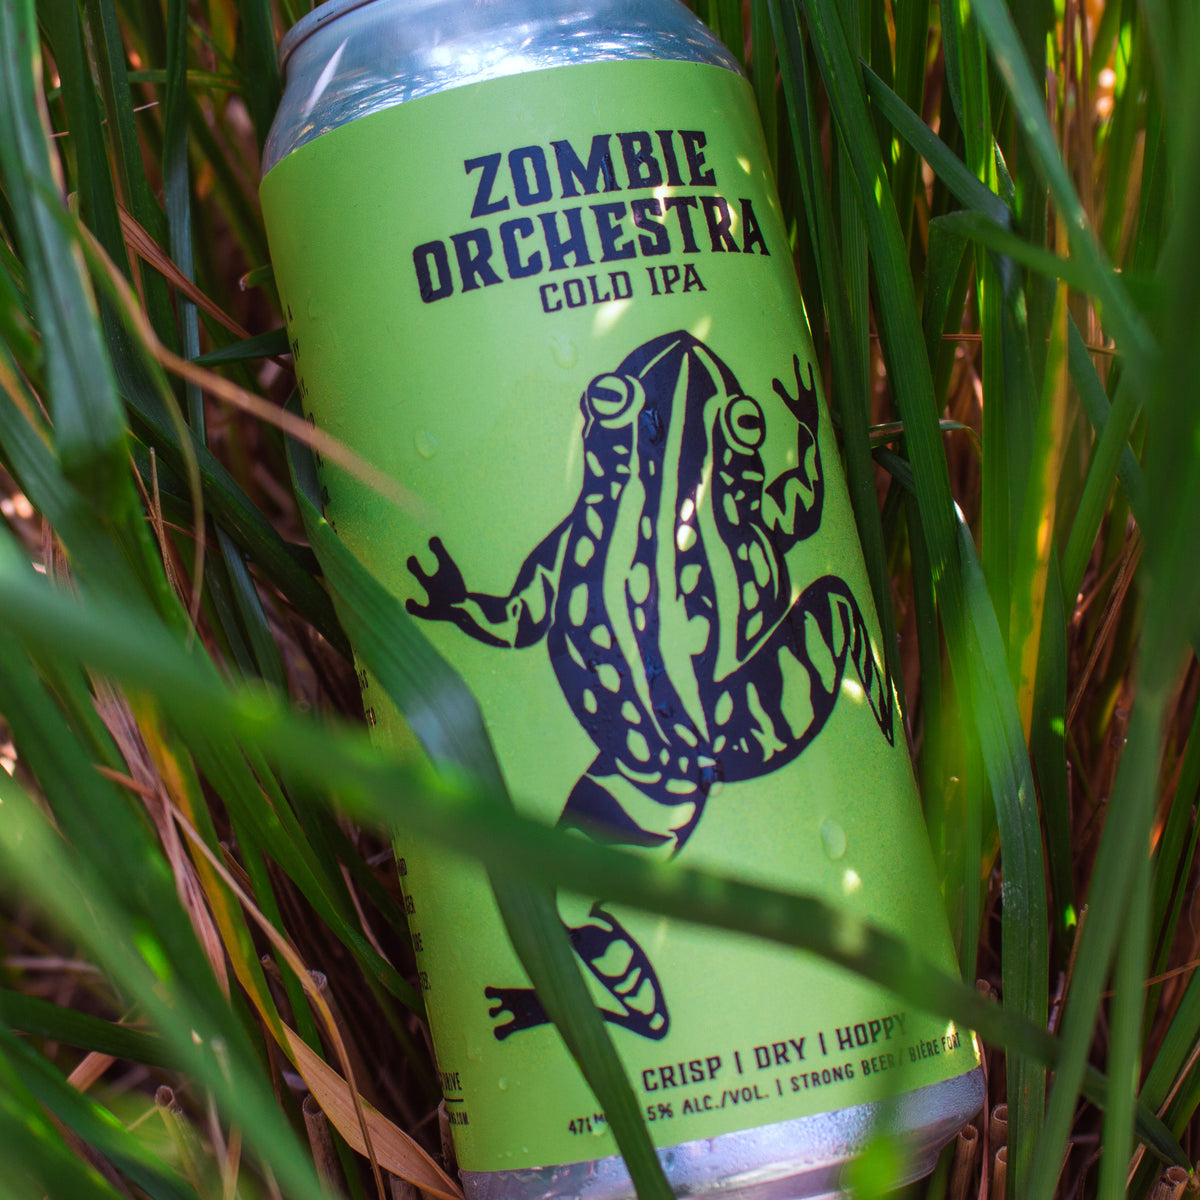 ZOMBIE ORCHESTRA | Cold IPA 4x473ml cans